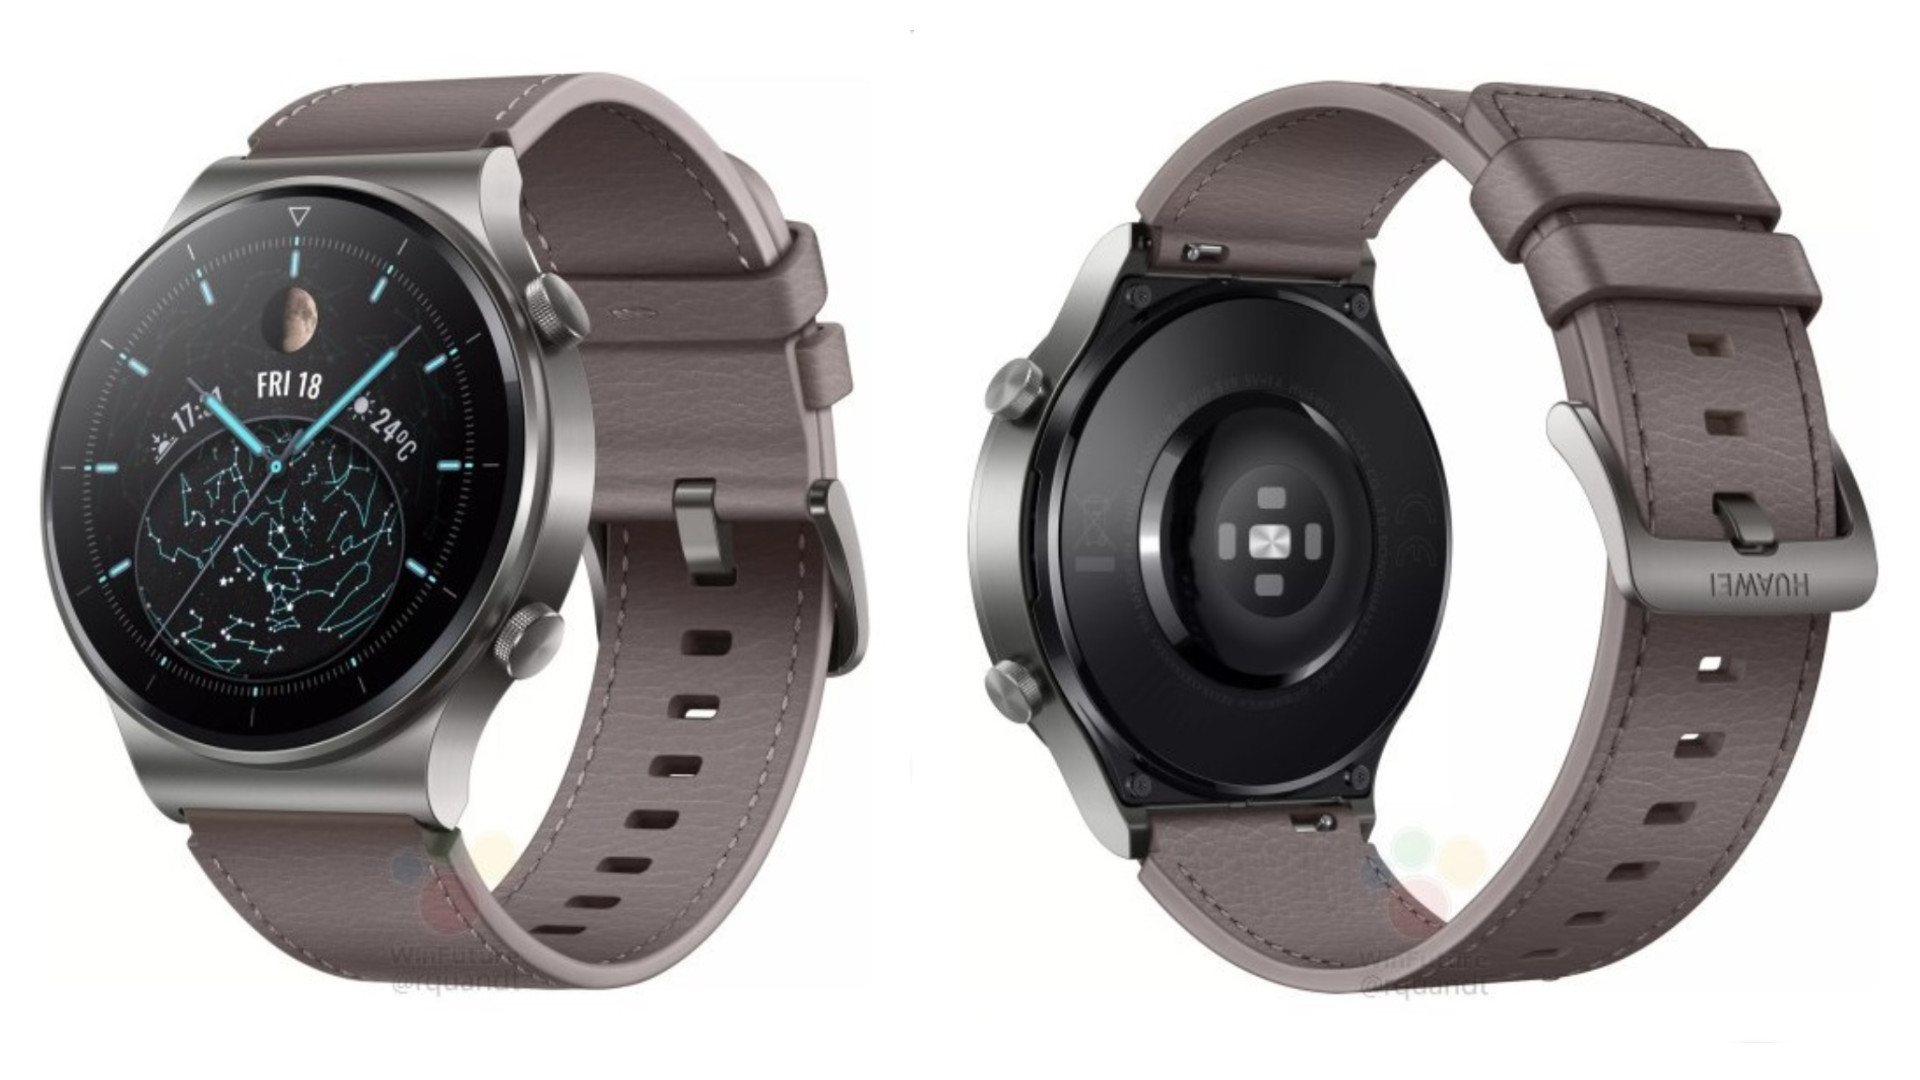 Huawei Watch GT 2 Pro launch all but confirmed for later this week